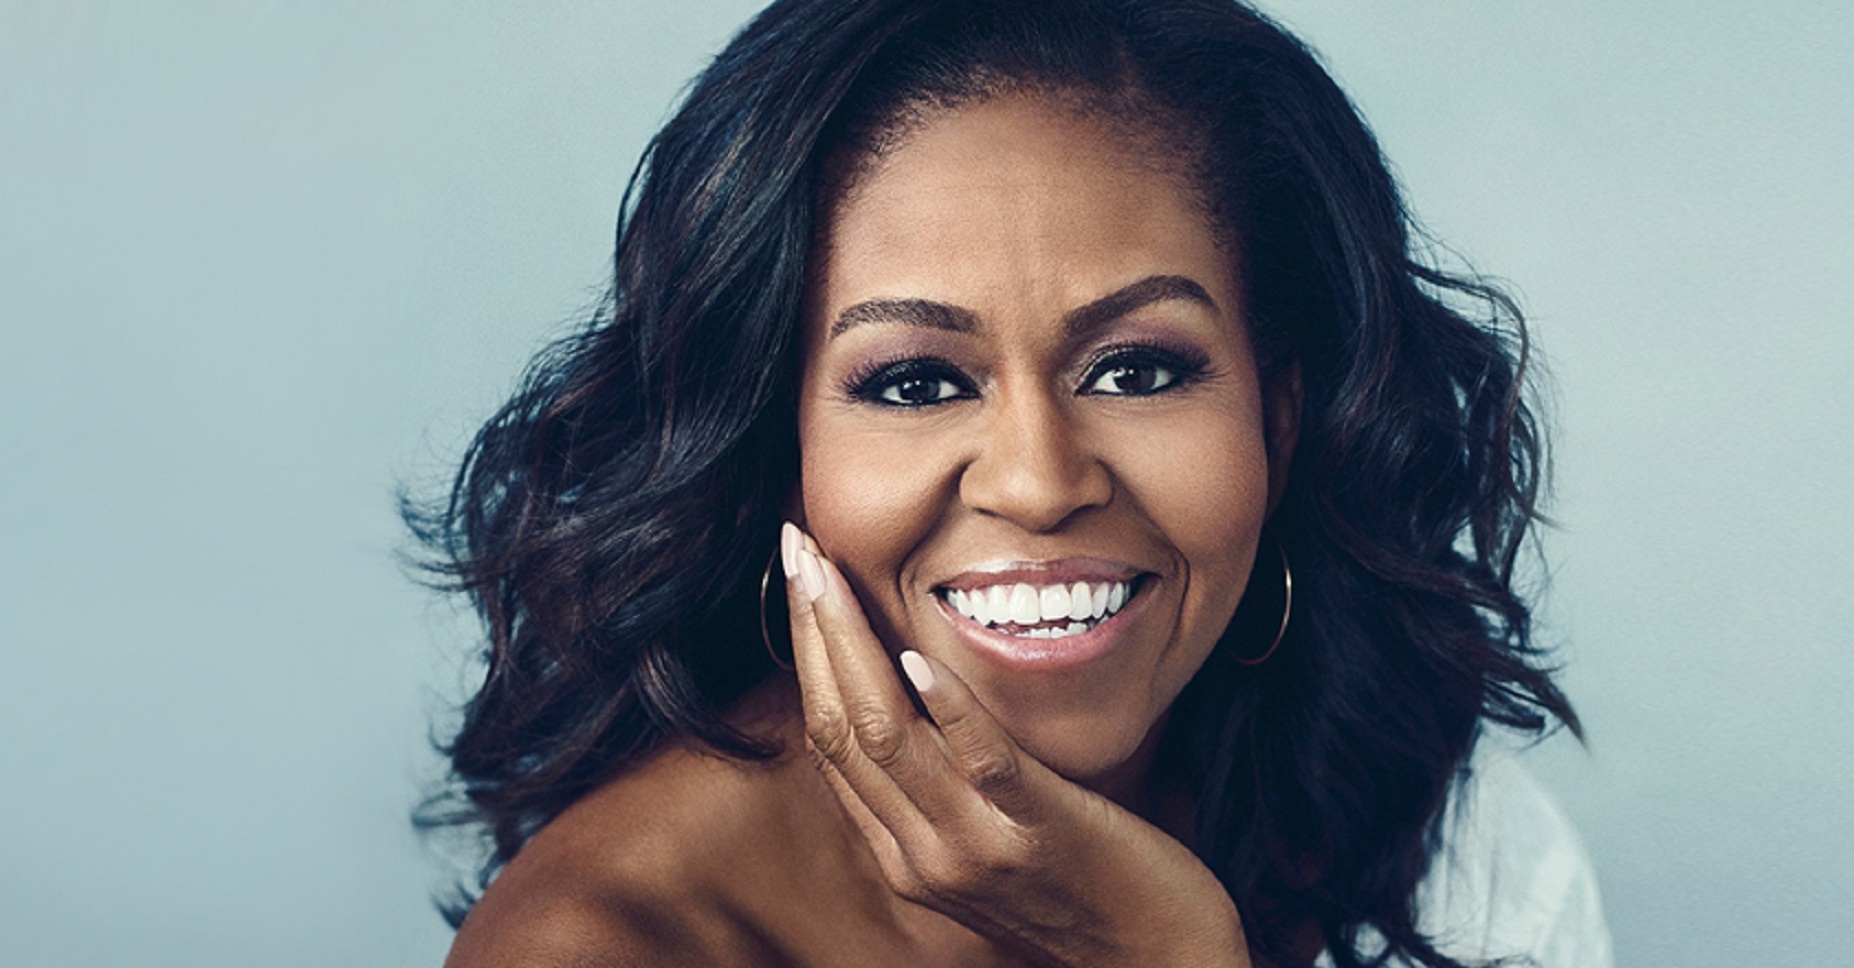 Michelle Obama Voted ‘Most Admired Woman’, Beating Oprah Winfrey, Angelina Jolie in a Poll